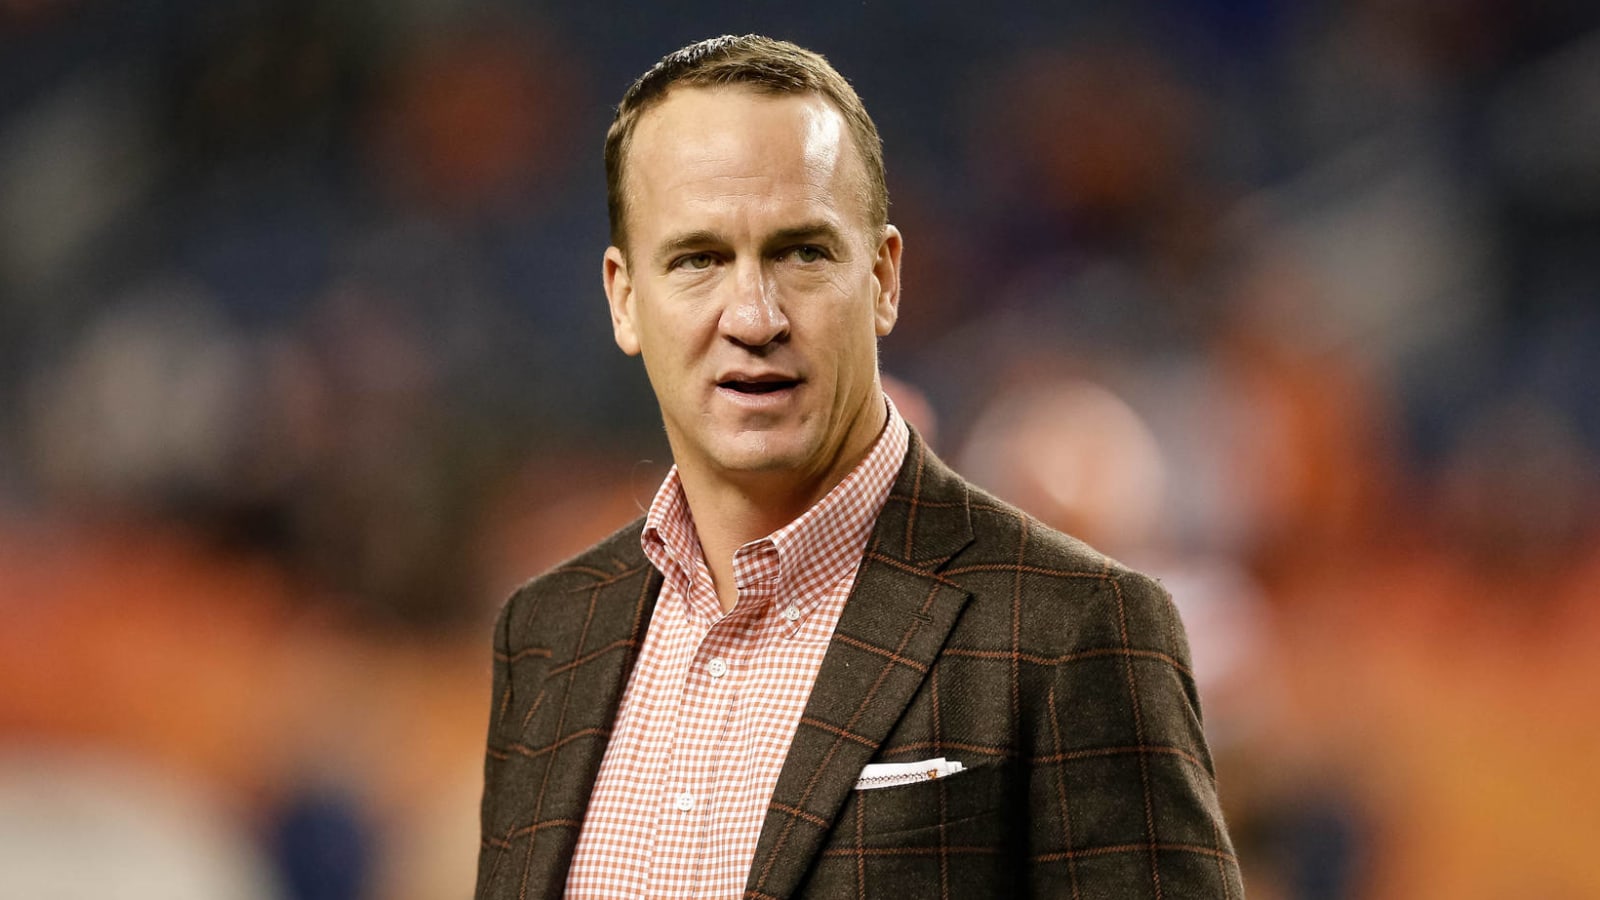 Peyton Manning eyeing owner/executive role with Broncos?